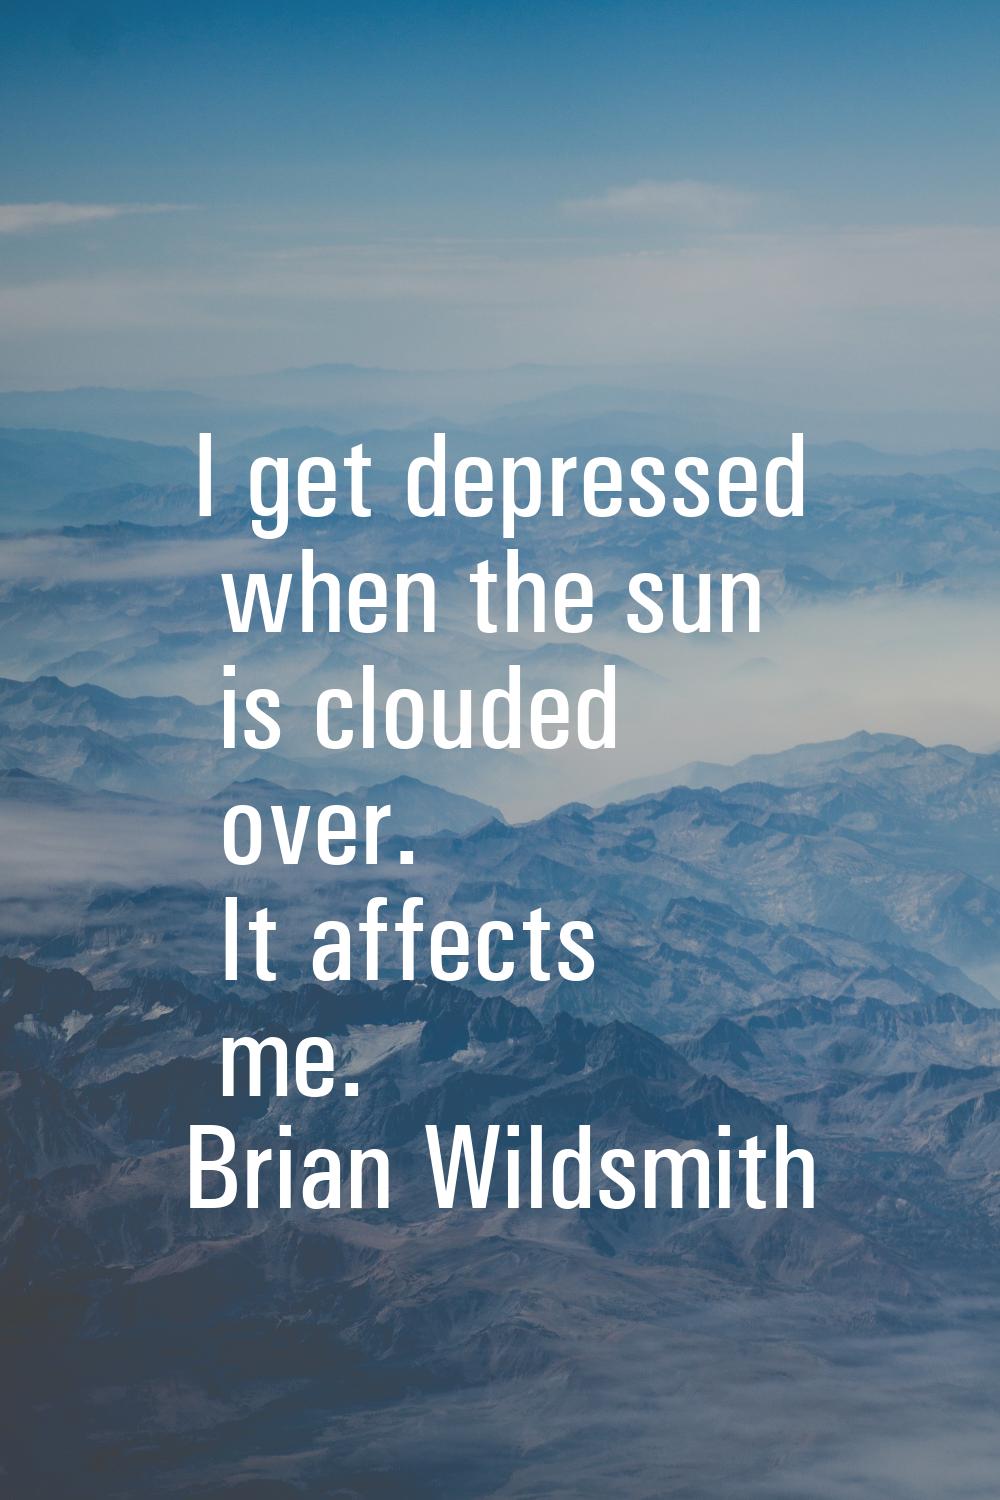 I get depressed when the sun is clouded over. It affects me.